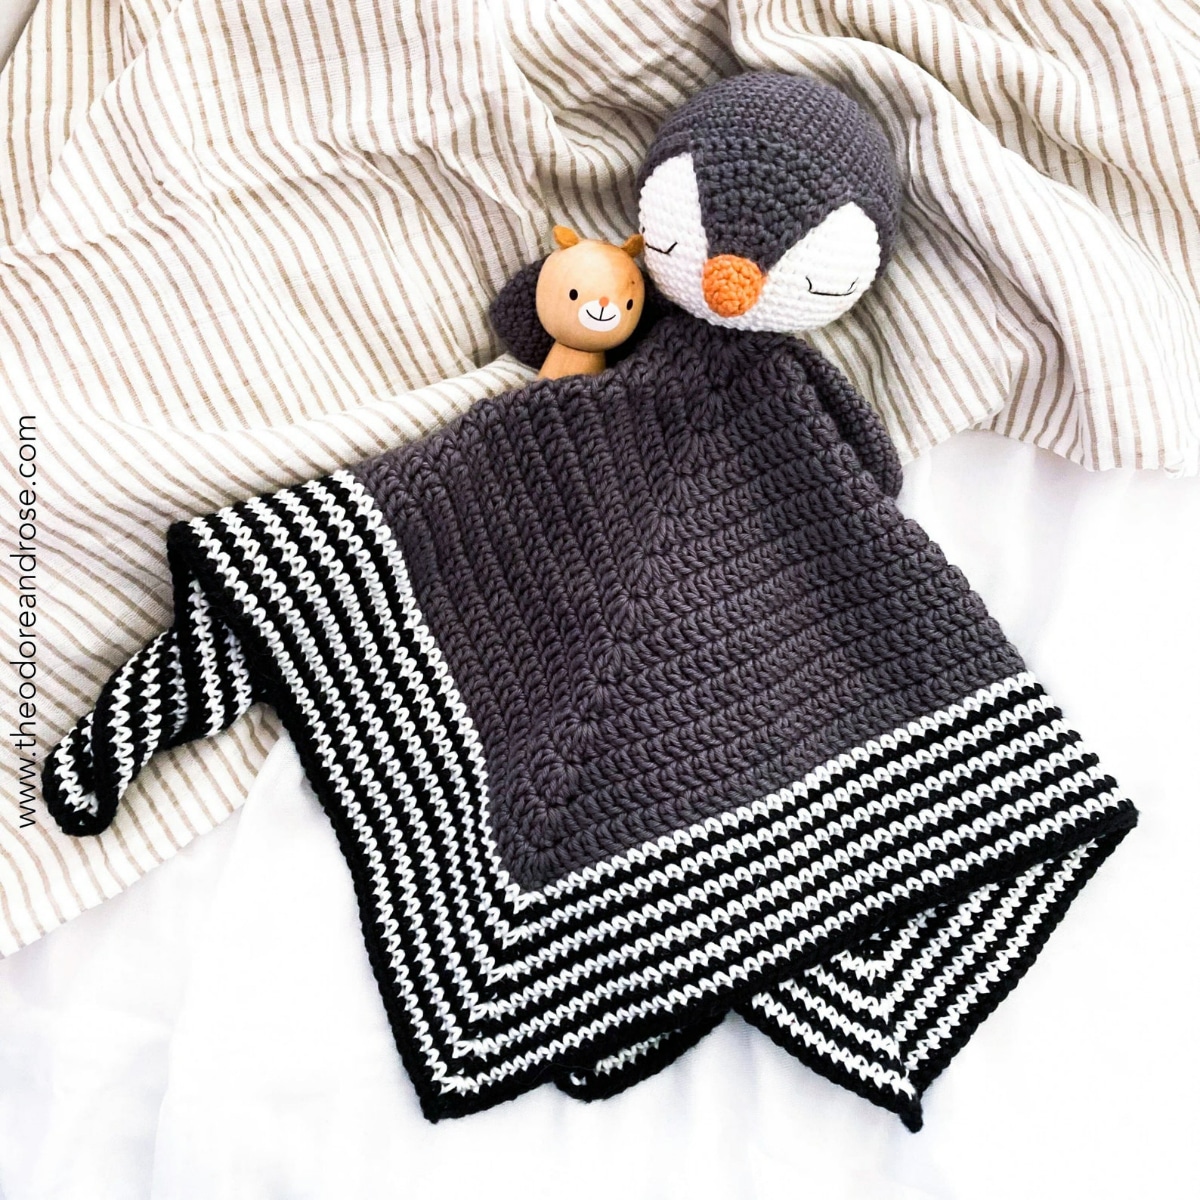 Black crochet blanket with white diagonal stripes on the bottom third with a penguin head stitched at the top laying on a bed with a cat cuddly toy.